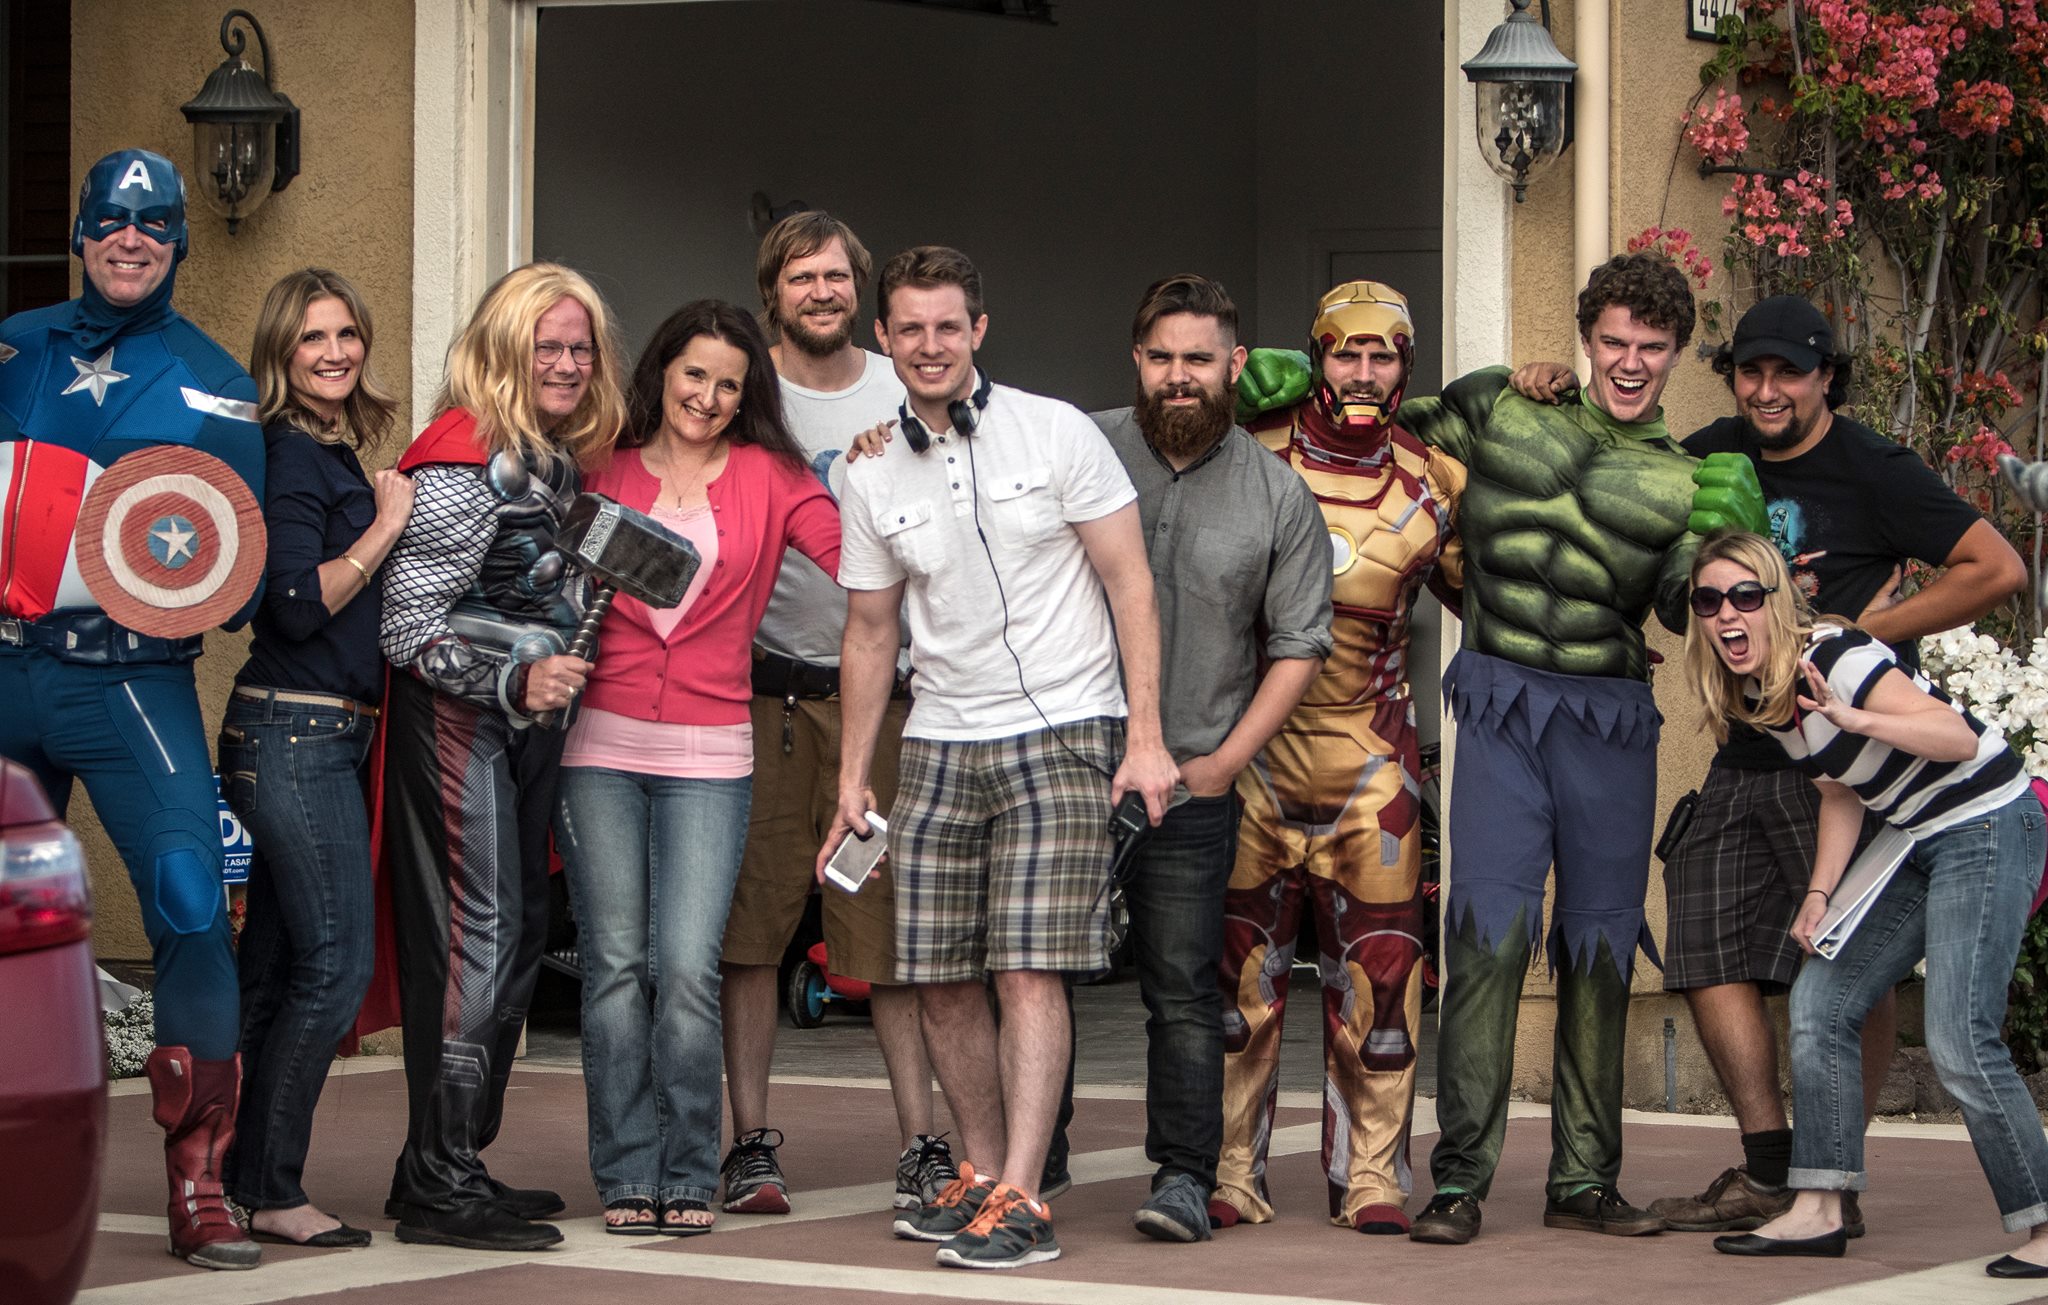 Pamela Daly with Alagna Pictures for Kellogg's Marvel Avengers Commercial.